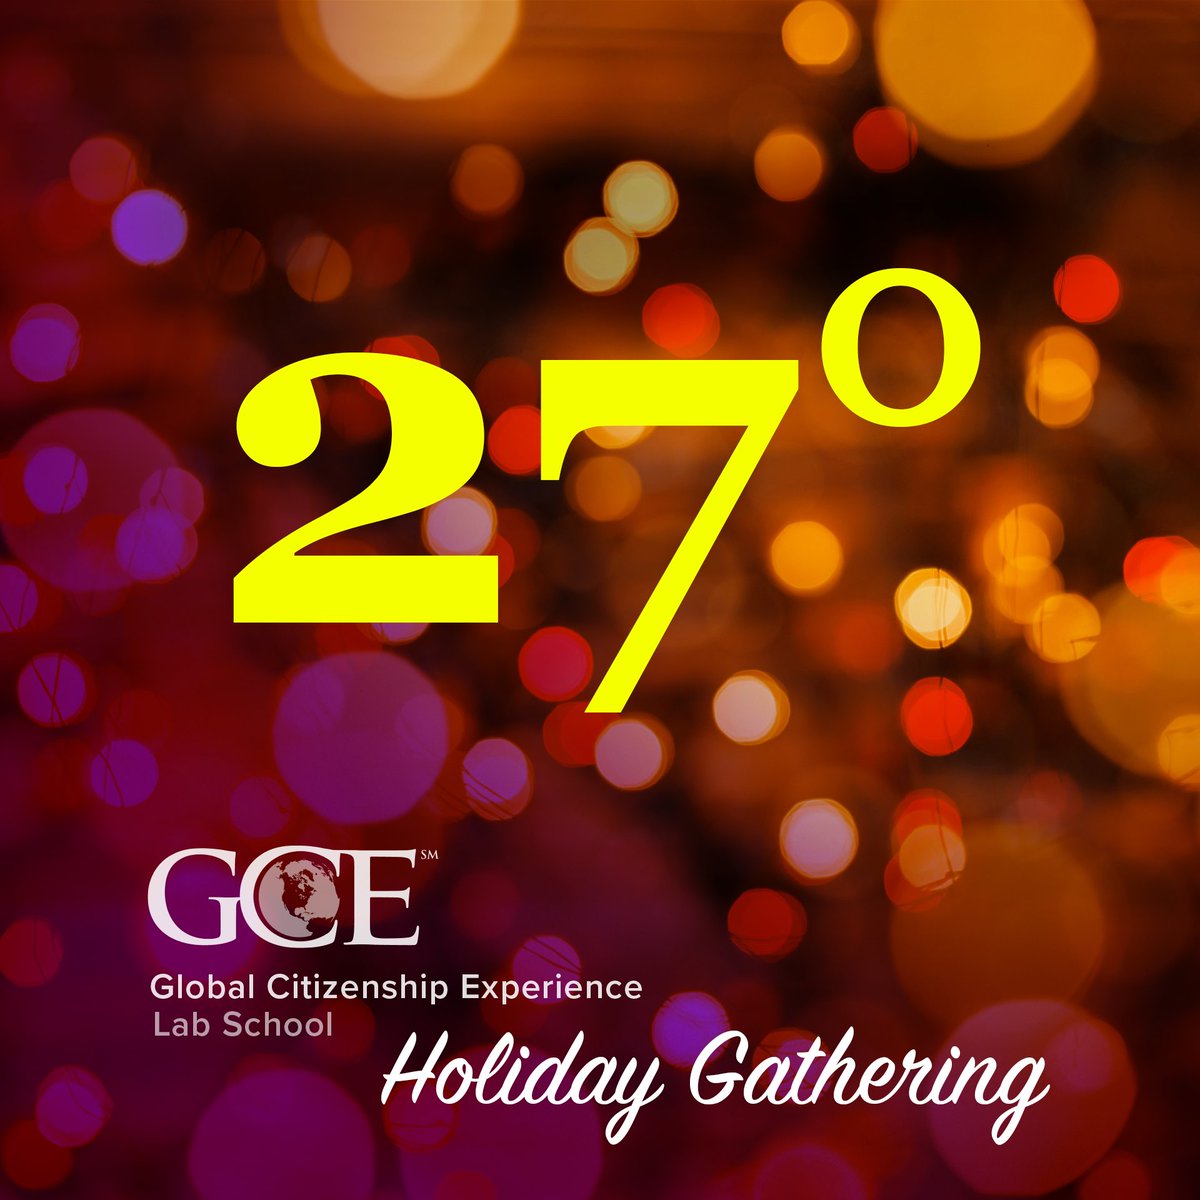 It's going to be 27° out there tonight! From 5–7:30, make GCE your warming station on your way to @Christkindlmarket or the tree lighting at #MillenniumPark. We have cookies and cocoa (and bathrooms)! Use gcelab.school/parking10 for GCE's $10 parking